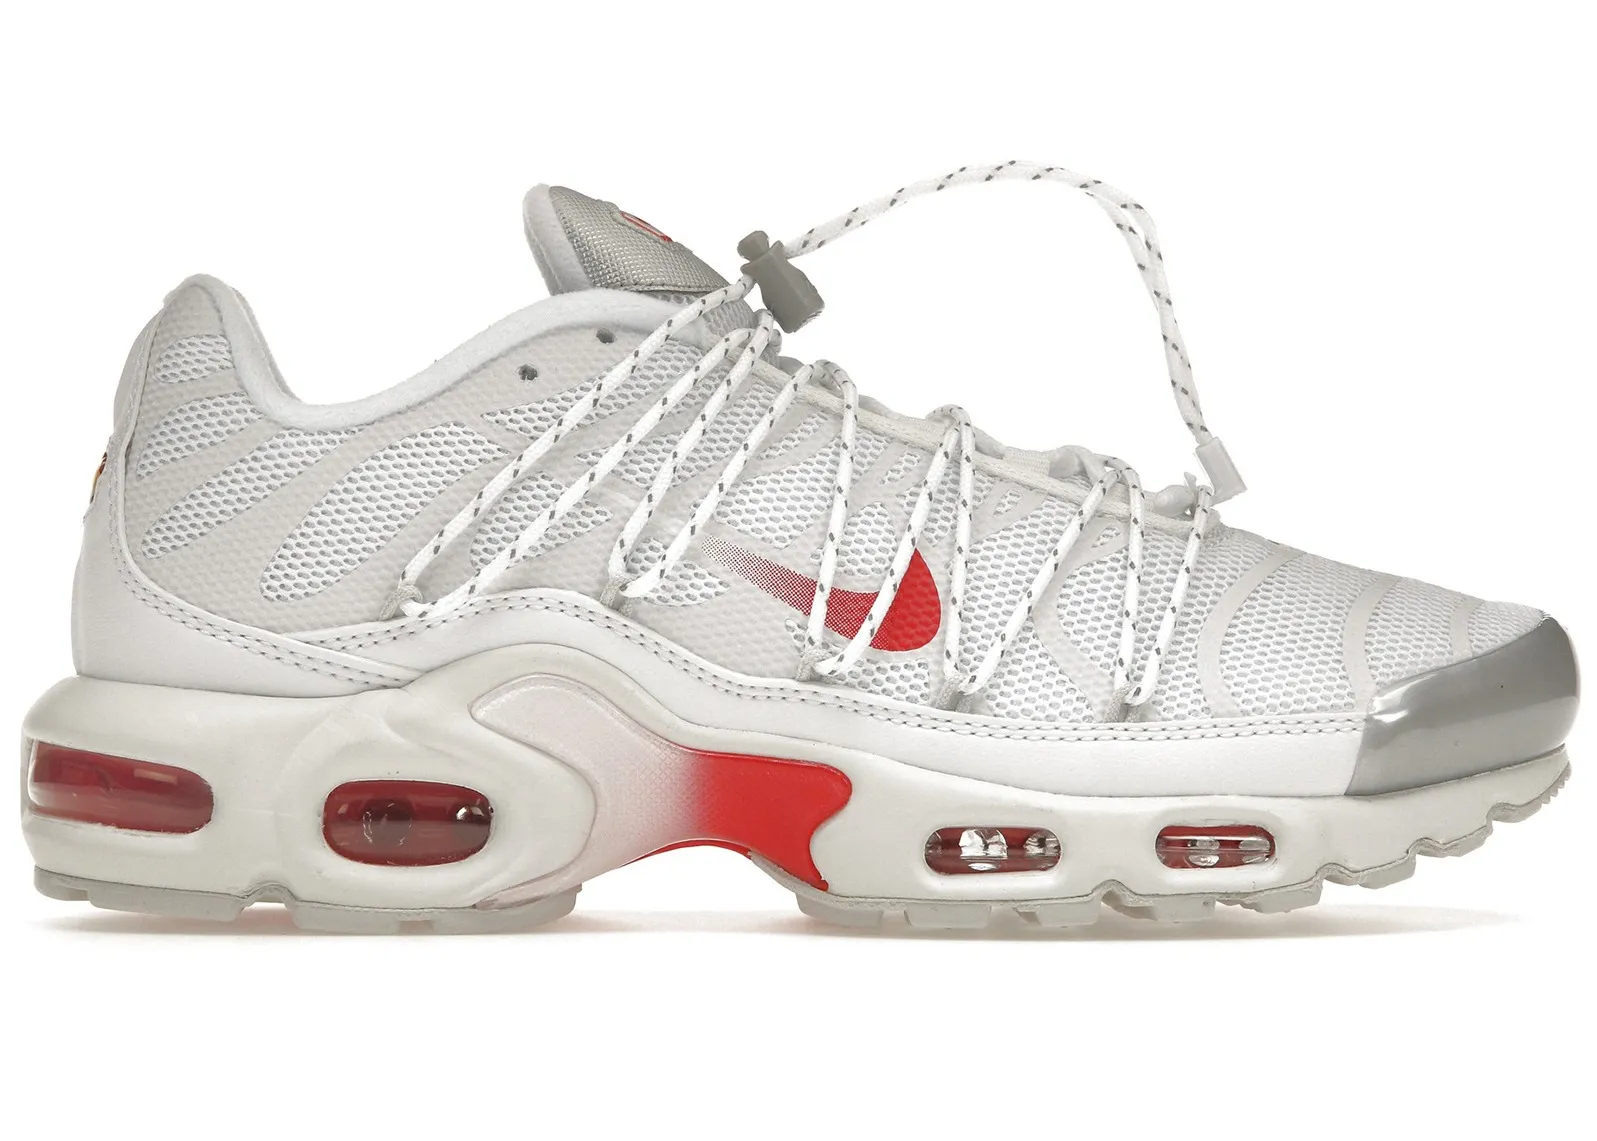 Nike Air Max Plus Lace Utility White University Red 